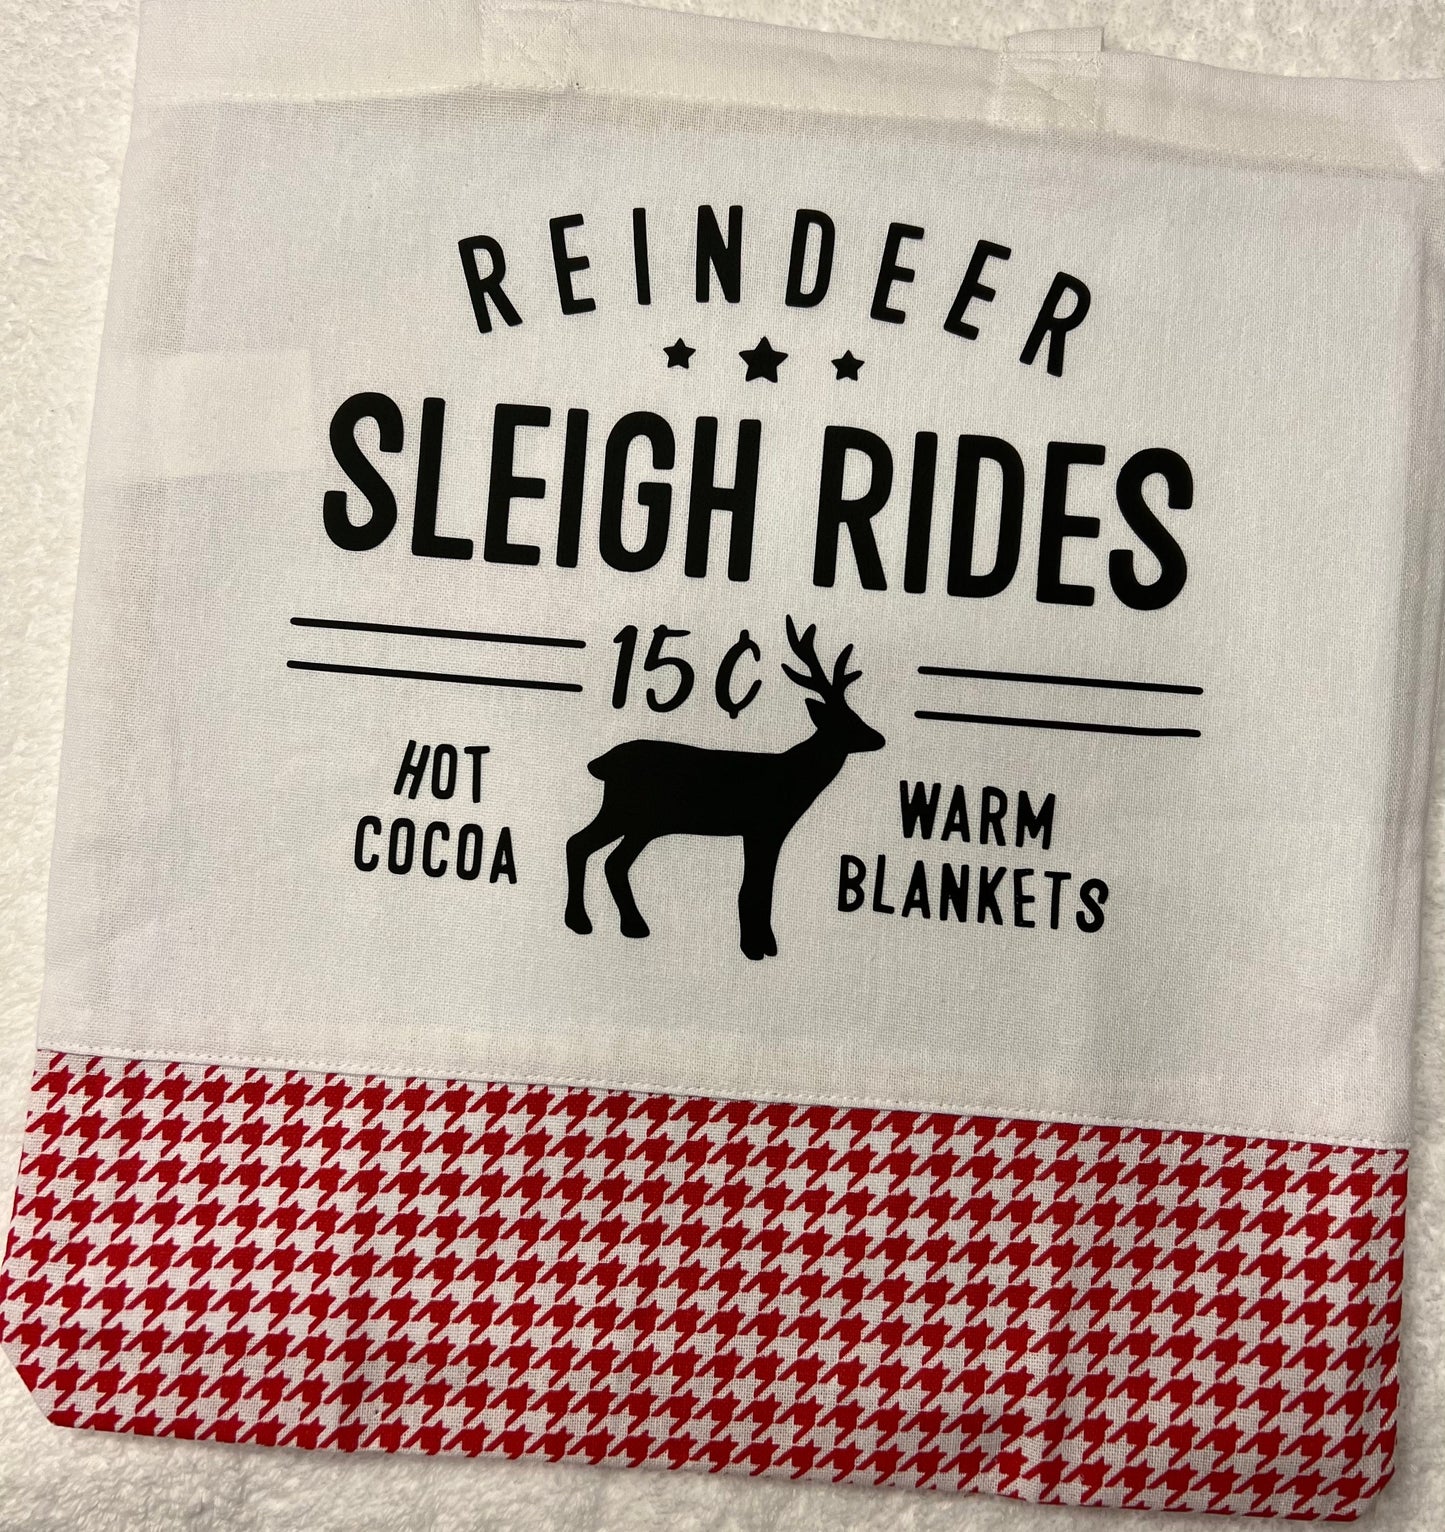 Michelle's Creatives Reindeer, sleigh rights, hot cocoa, warm blankets, $.15 tote bag